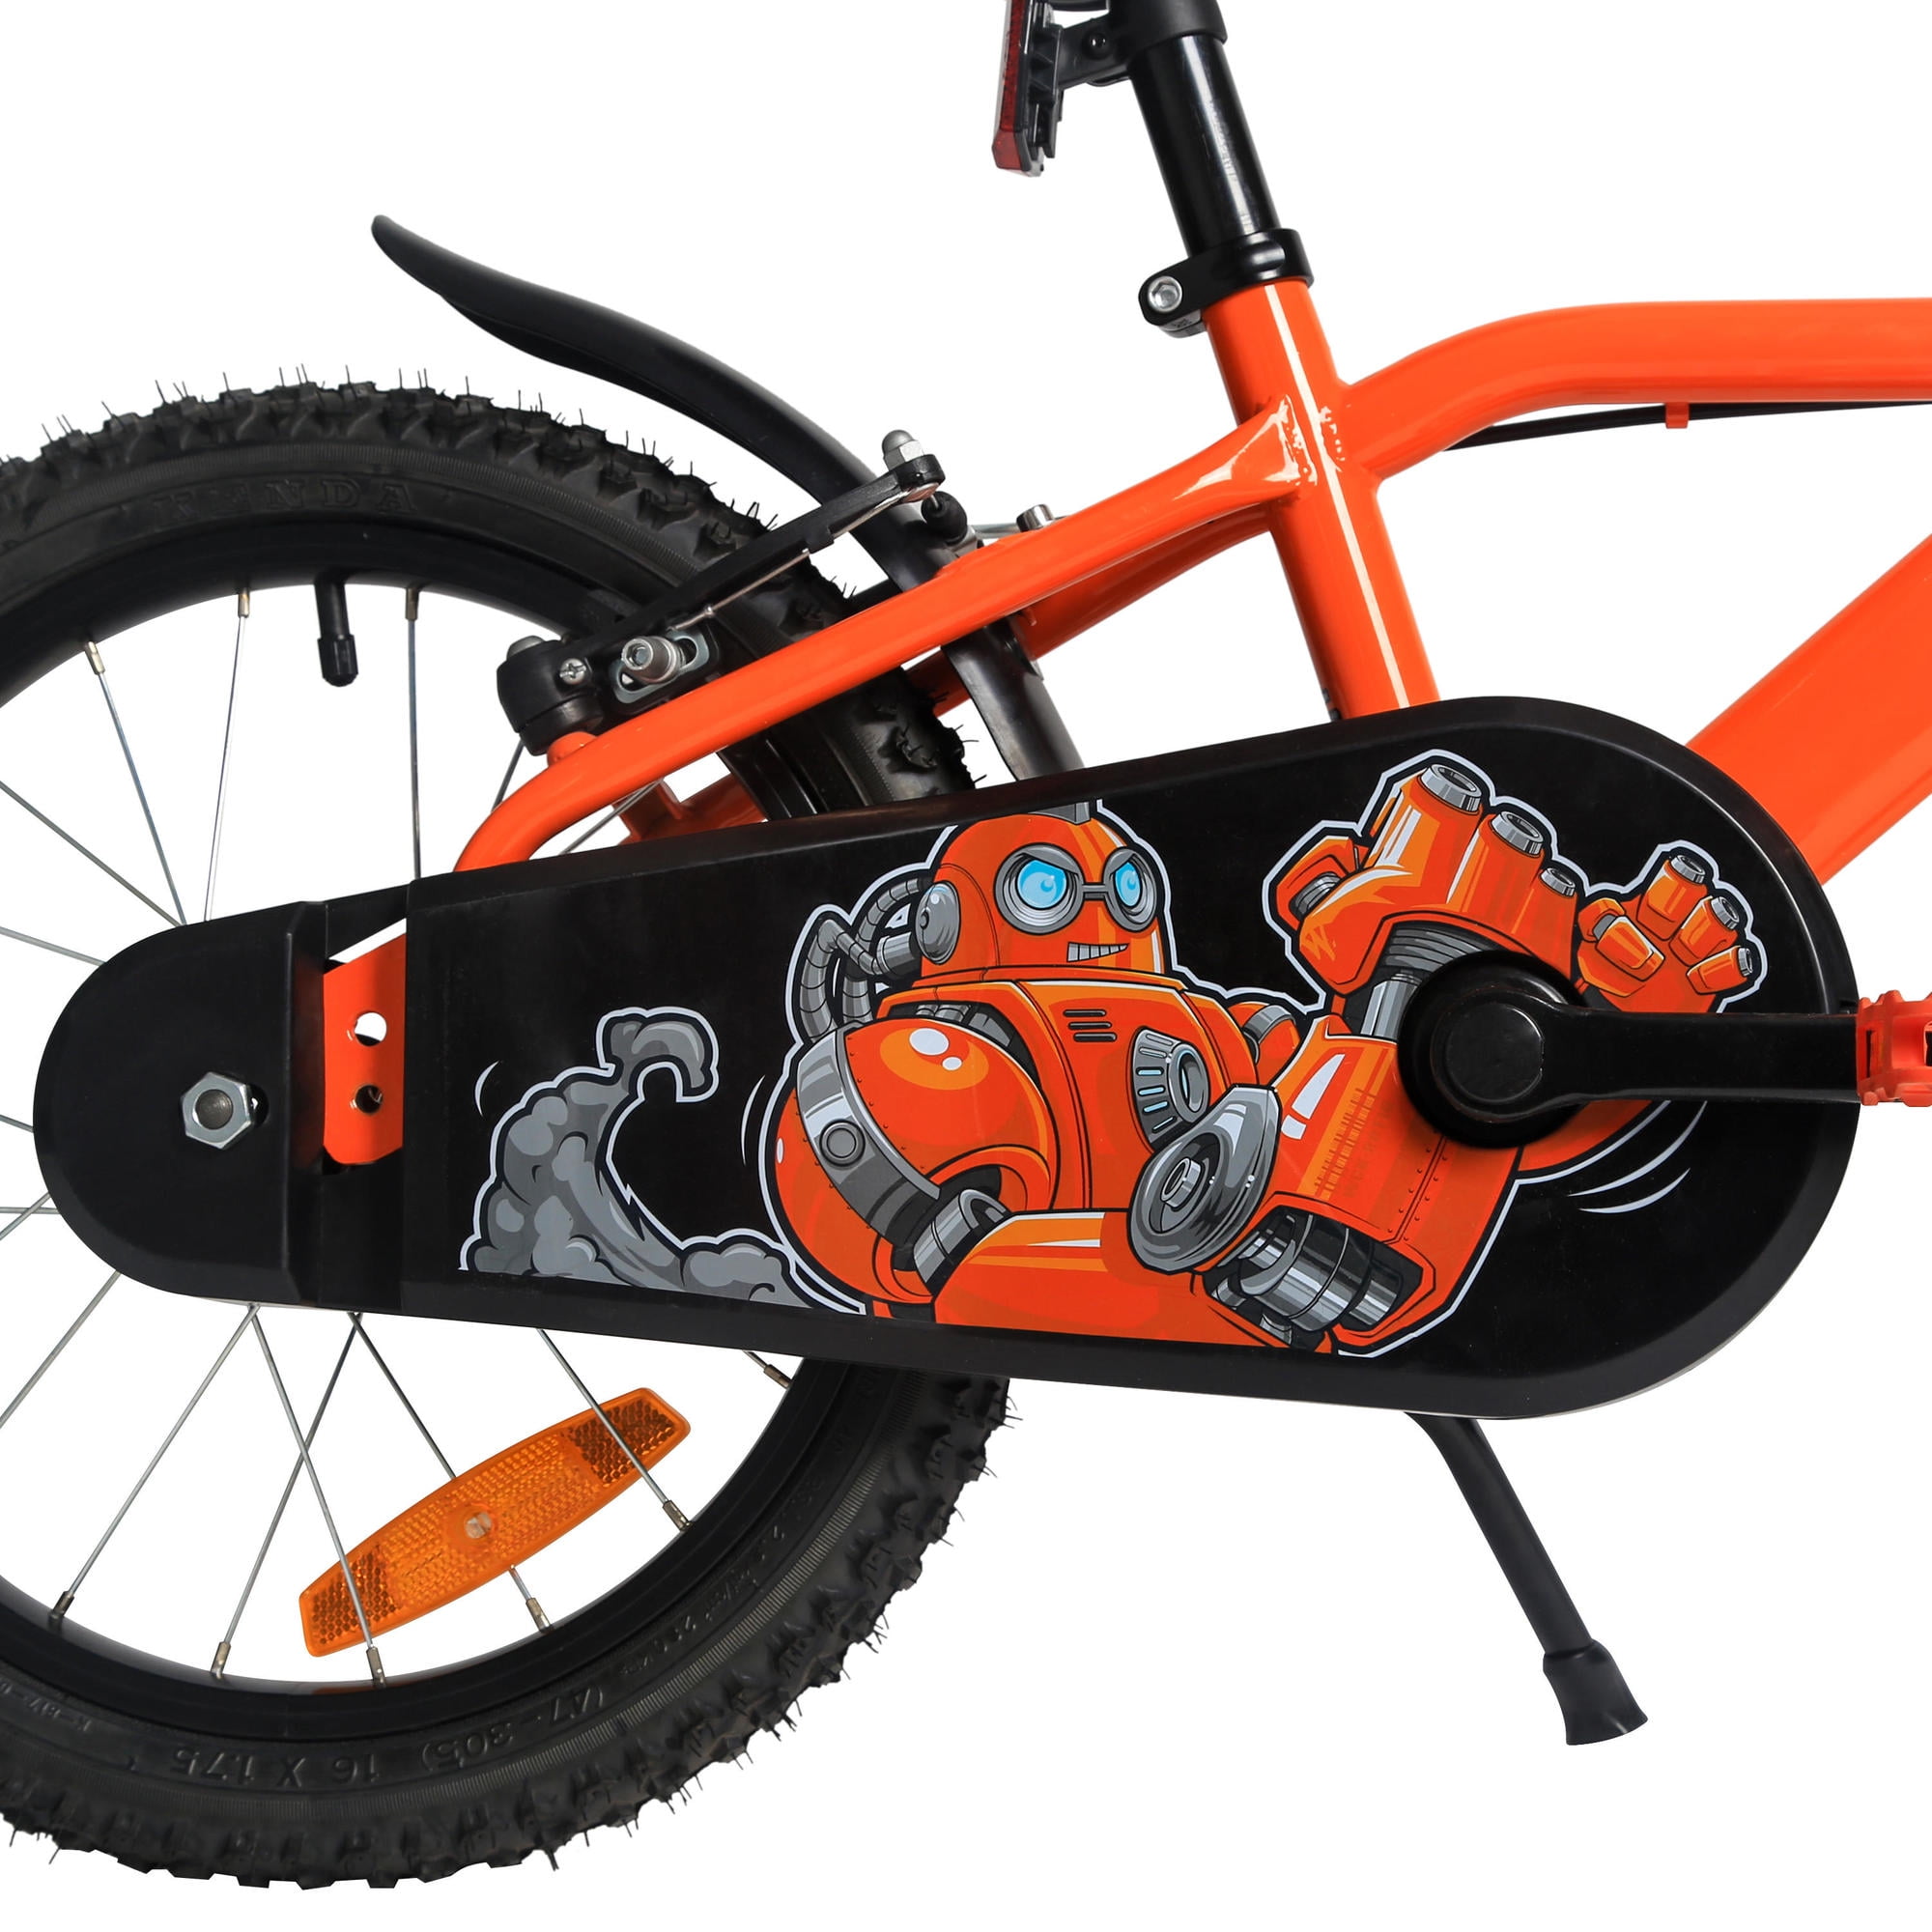 btwin cycle for kids